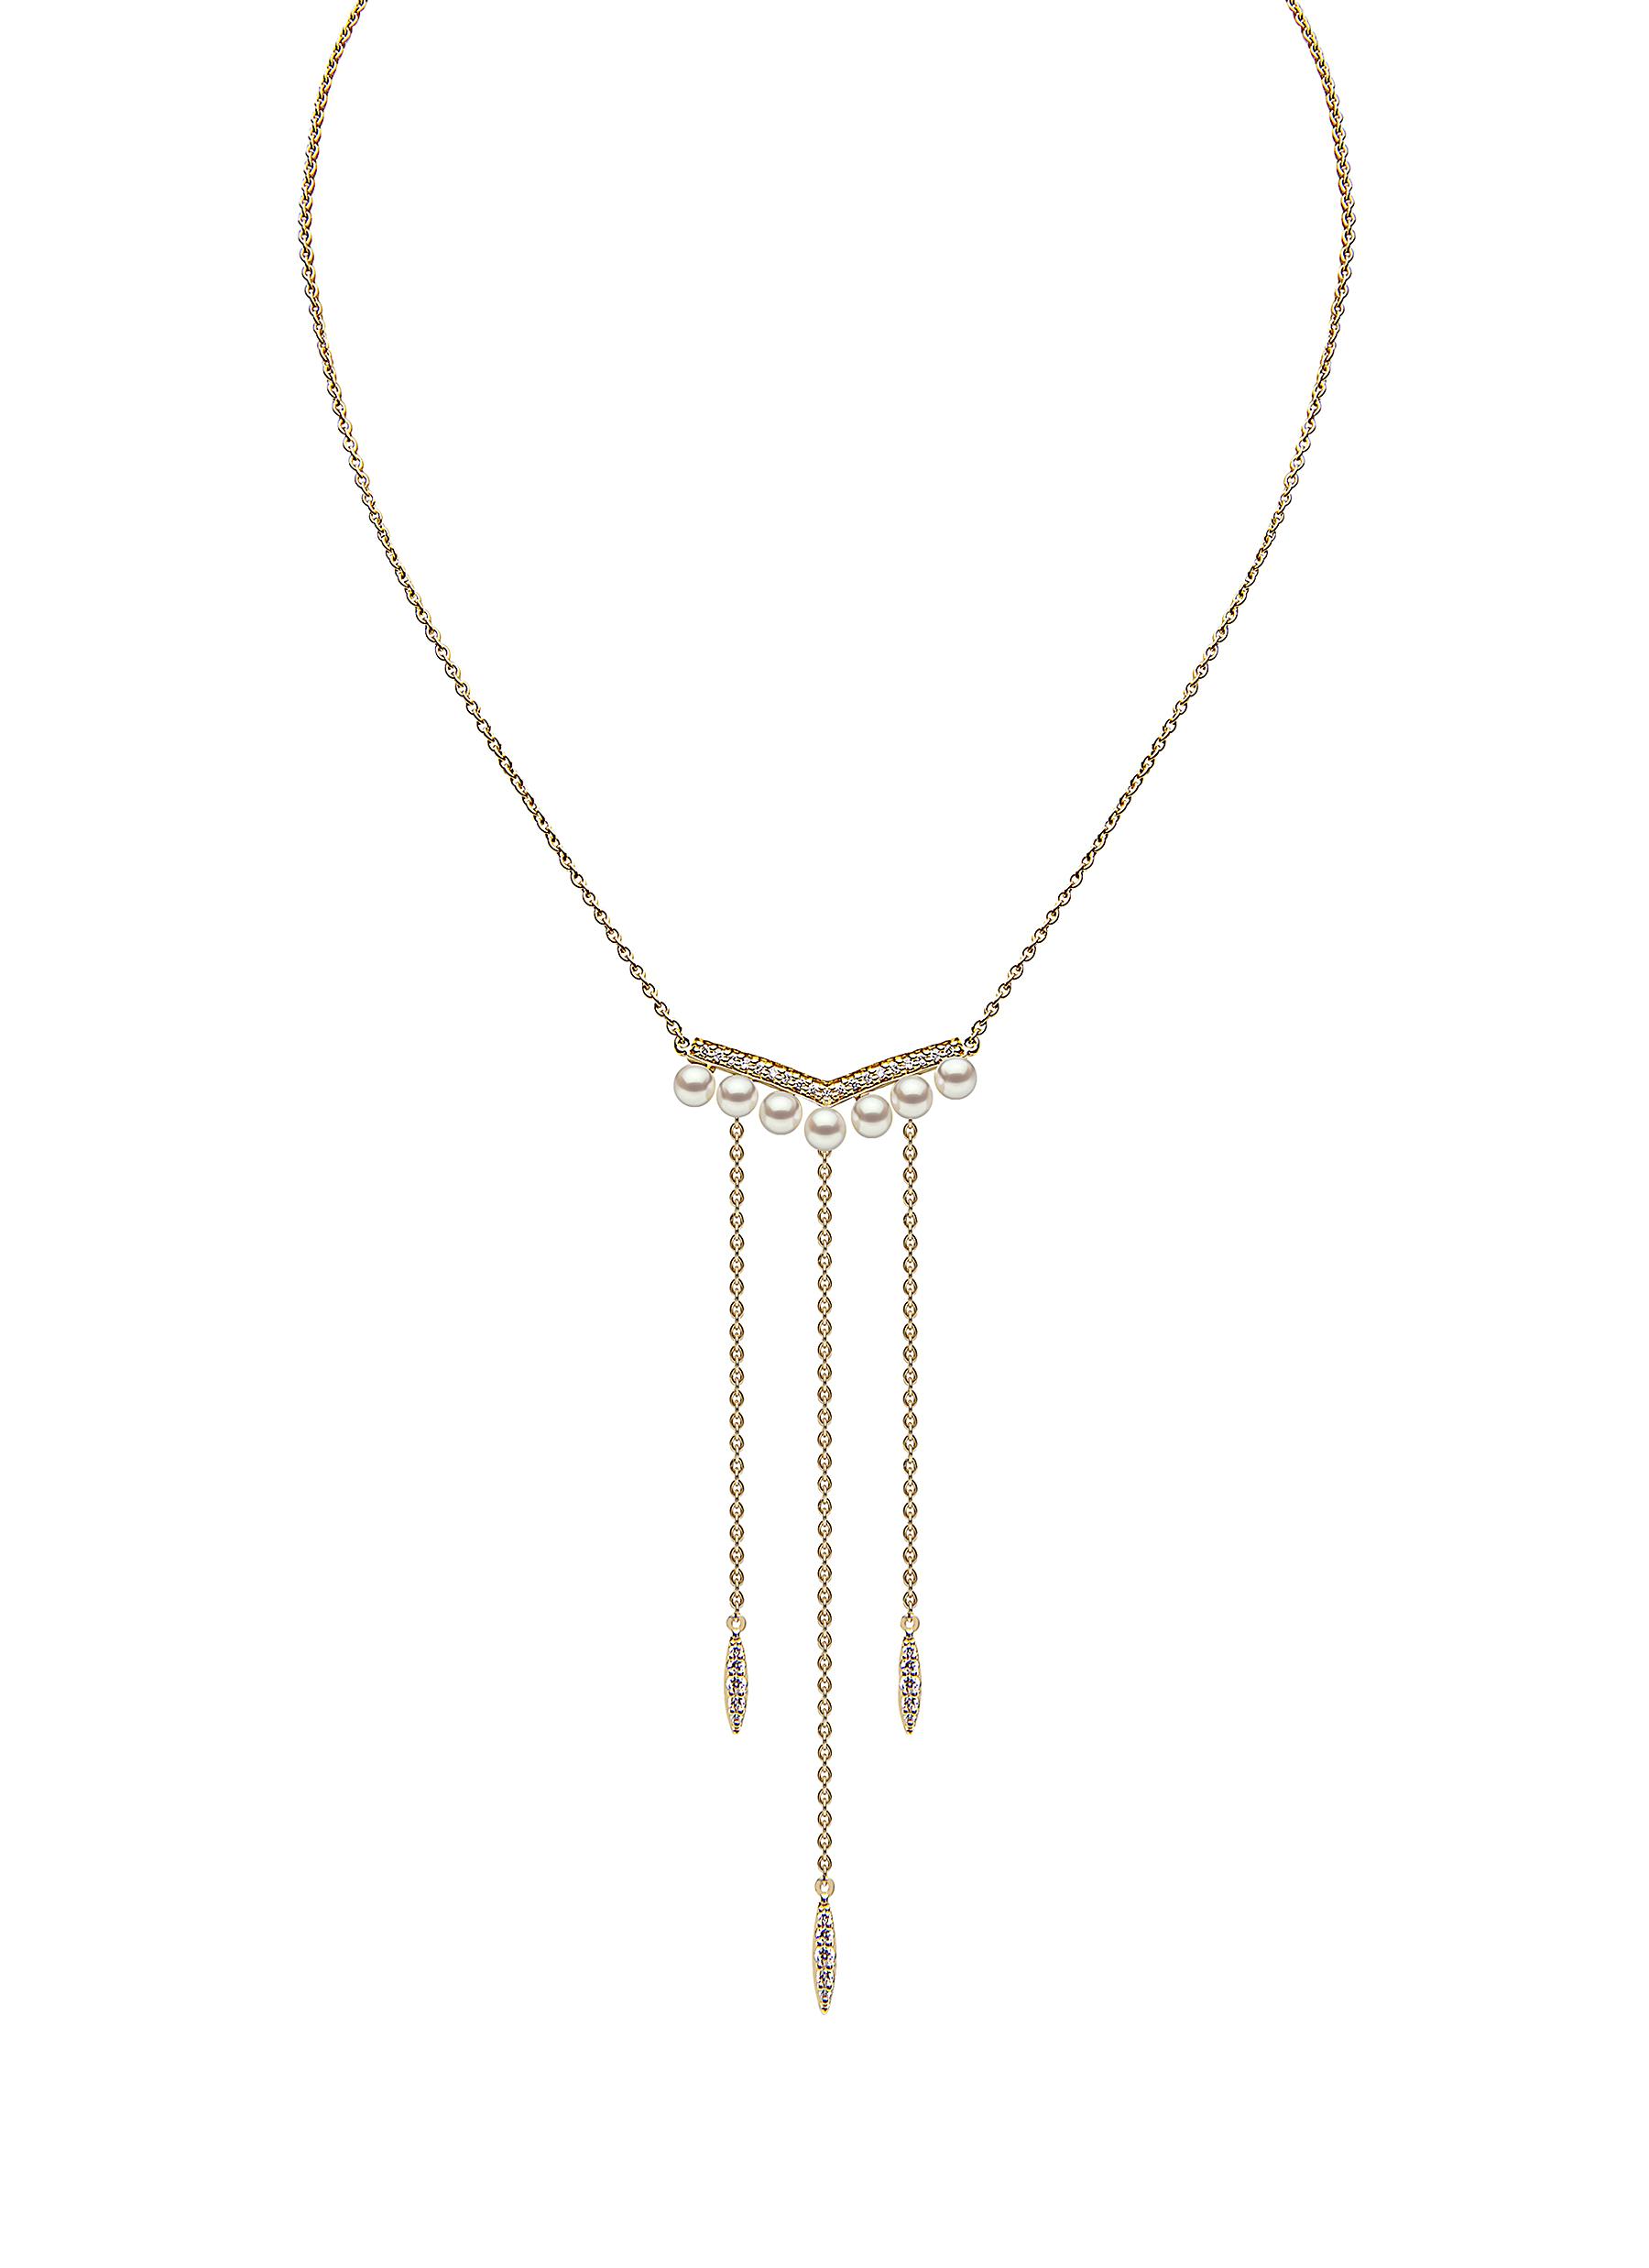 24K 995 Pure Gold Paperclip Necklace for Women - 1-1-GN-V00581 in 44.690  Grams